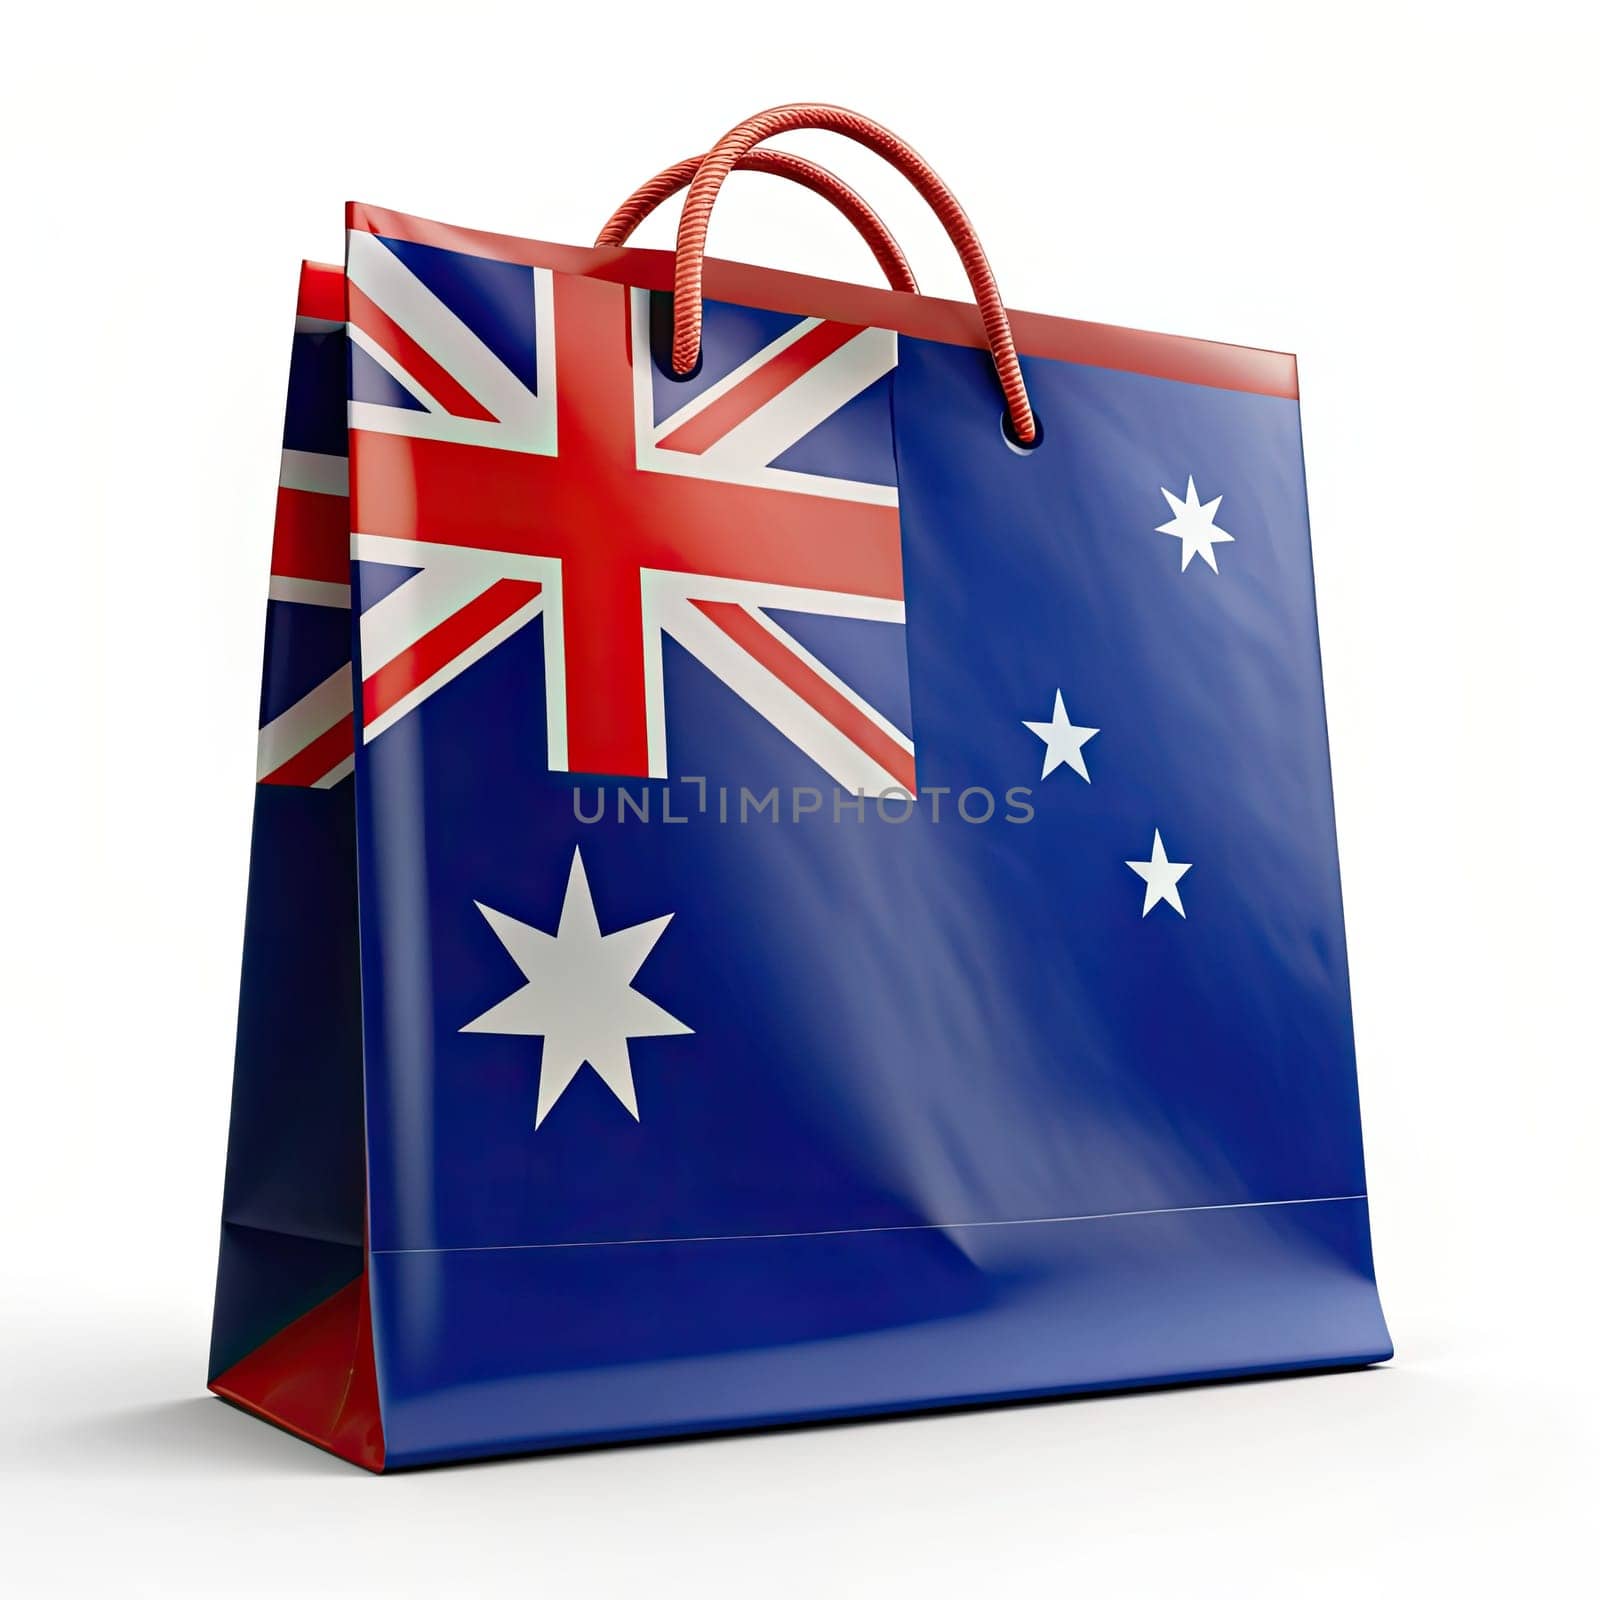 Australian Flag Tote Bag Against White Backdrop. Australia Flag Shopping Bag: Carry Your Aussie Pride Everywhere! Flaunt your Australian pride with our flag-inspired shopping bag. Australia Pride: Stylish Shopping Bag with Flag Design by Andrii_Ko